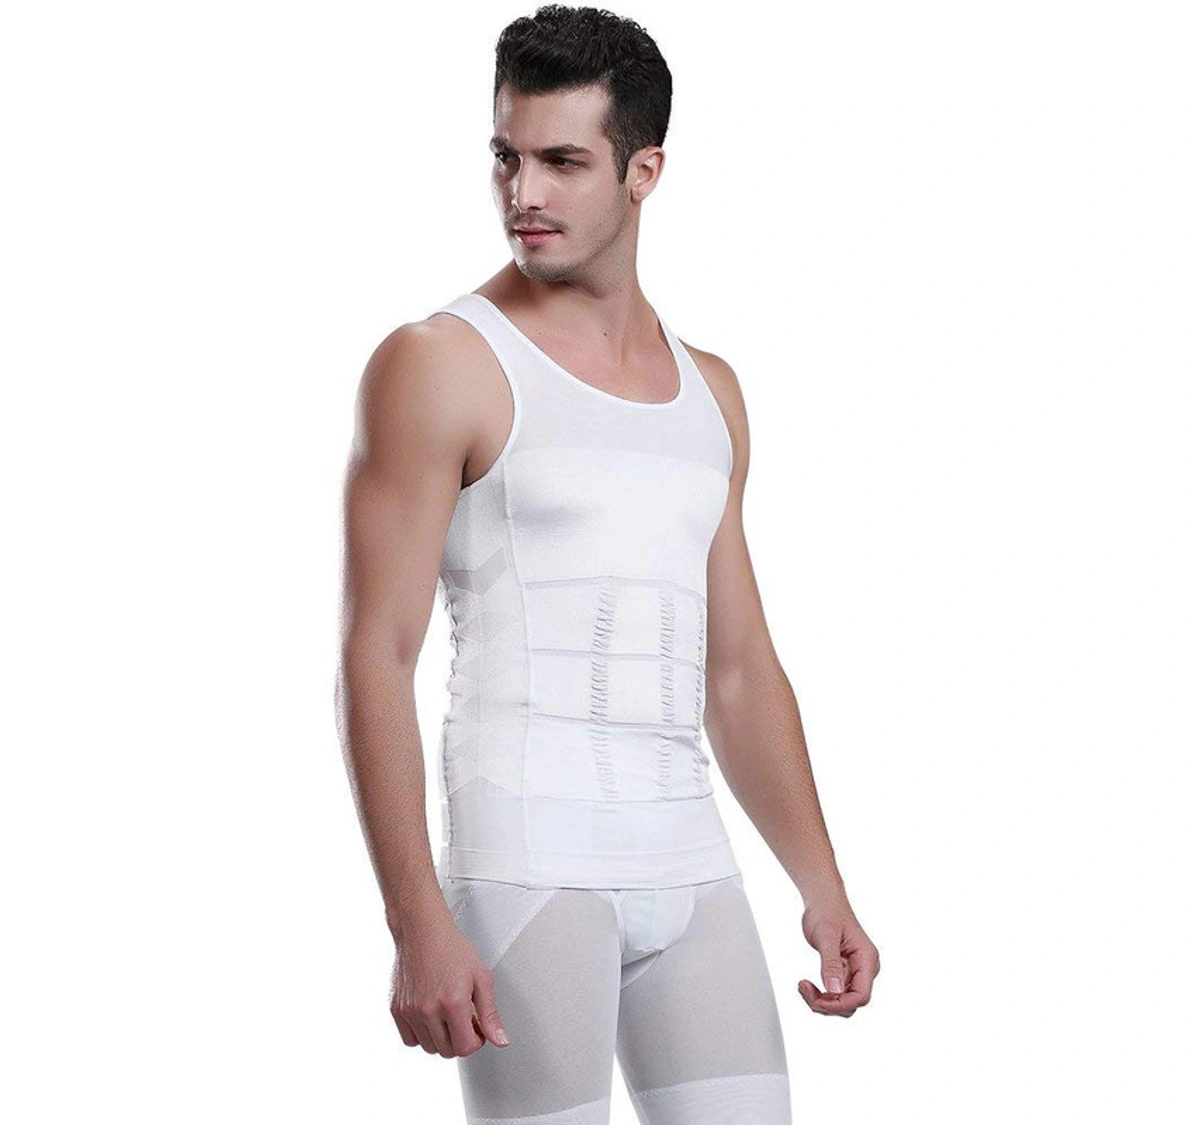 67% OFF on Everything Imported Slimming Tummy Tucker Body Shaper